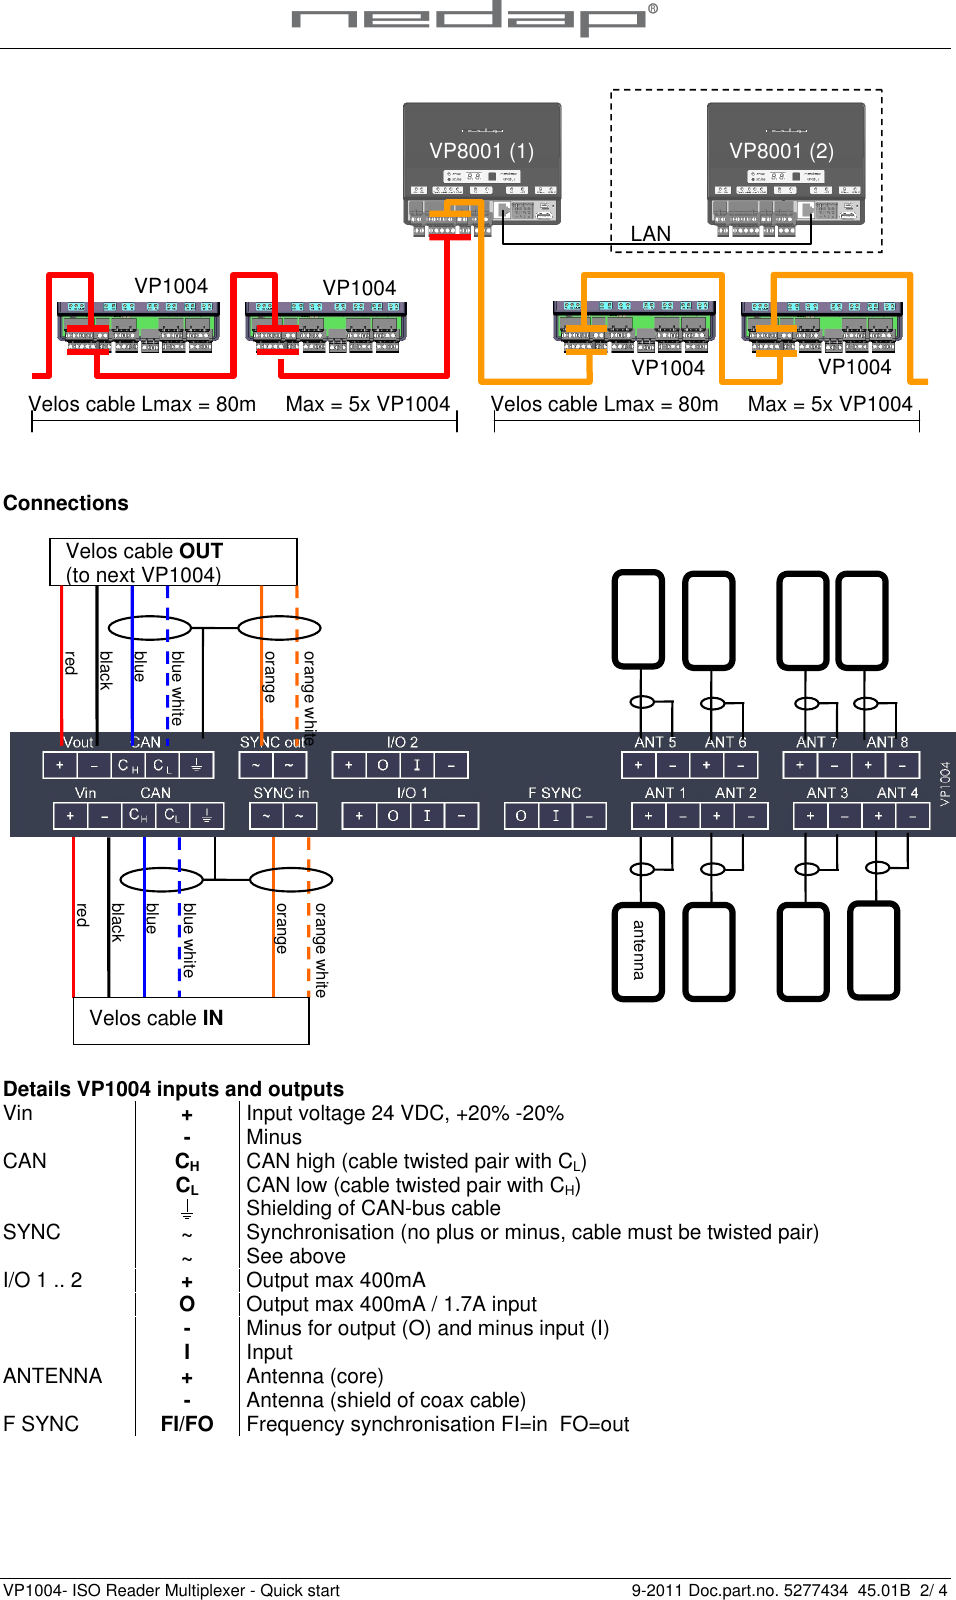   VP1004- ISO Reader Multiplexer - Quick start   9-2011 Doc.part.no. 5277434  45.01B  2/ 4        Connections   Details VP1004 inputs and outputs Vin + Input voltage 24 VDC, +20% -20%  - Minus CAN CH CAN high (cable twisted pair with CL)  CL CAN low (cable twisted pair with CH)   Shielding of CAN-bus cable SYNC ~ Synchronisation (no plus or minus, cable must be twisted pair)  ~ See above I/O 1 .. 2  + Output max 400mA  O Output max 400mA / 1.7A input  - Minus for output (O) and minus input (I)  I Input ANTENNA + Antenna (core)  - Antenna (shield of coax cable) F SYNC FI/FO Frequency synchronisation FI=in  FO=out  VP1004 VP1004 VP1004 VP8001 (1)  VP8001 (2) VP1004 LAN orange blue white blue black red orange white Velos cable IN Velos cable OUT (to next VP1004) antenna orange blue white blue black red orange white Velos cable Lmax = 80m     Max = 5x VP1004 Velos cable Lmax = 80m     Max = 5x VP1004 